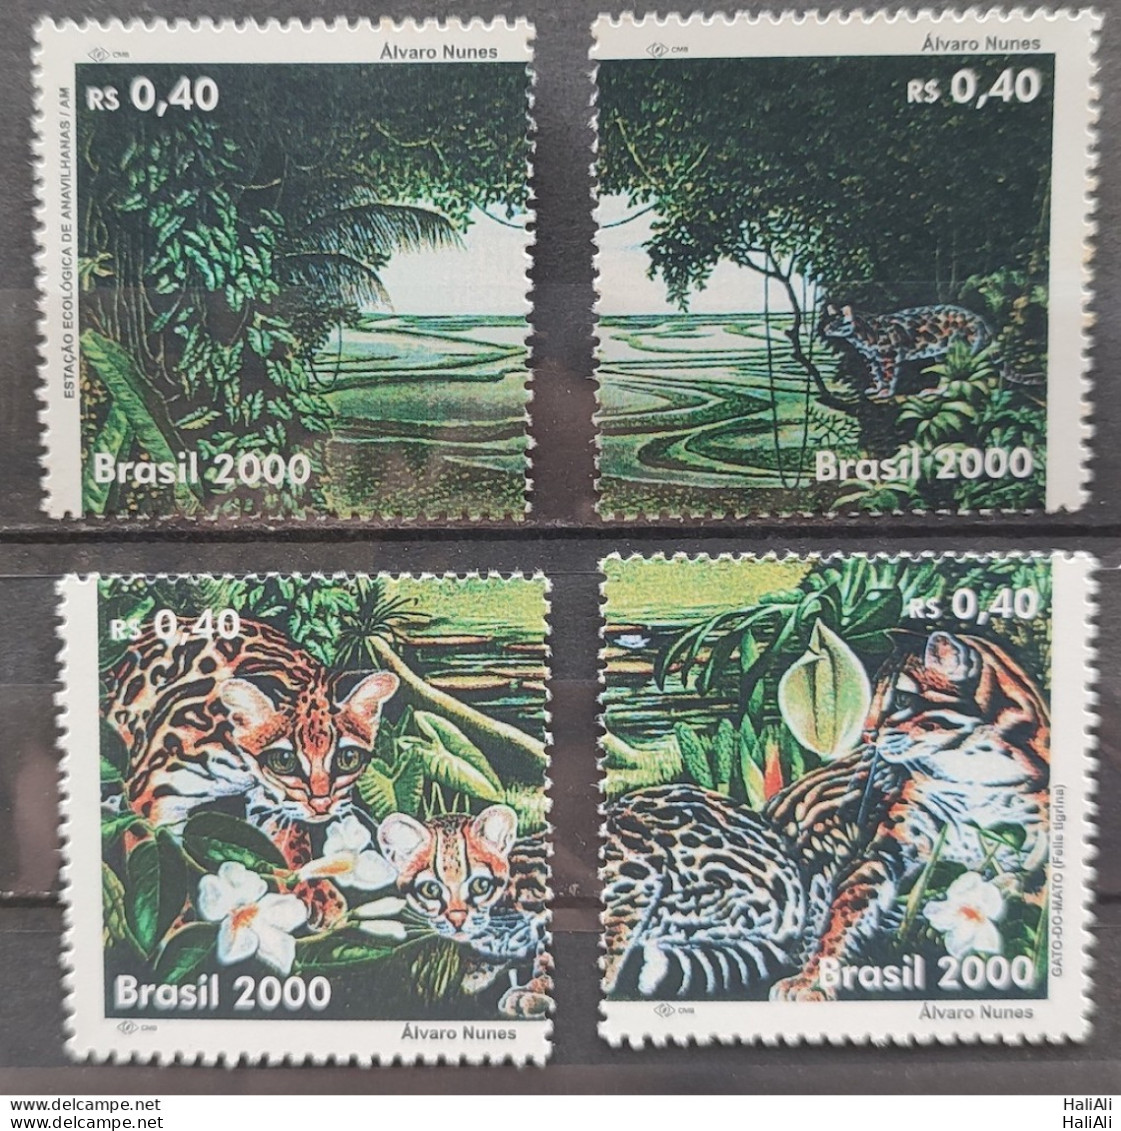 C 2285 Brazil Stamp Preservation Of The Environment Expo Cat Jaguar 2000 Complete Series Separate - Unused Stamps